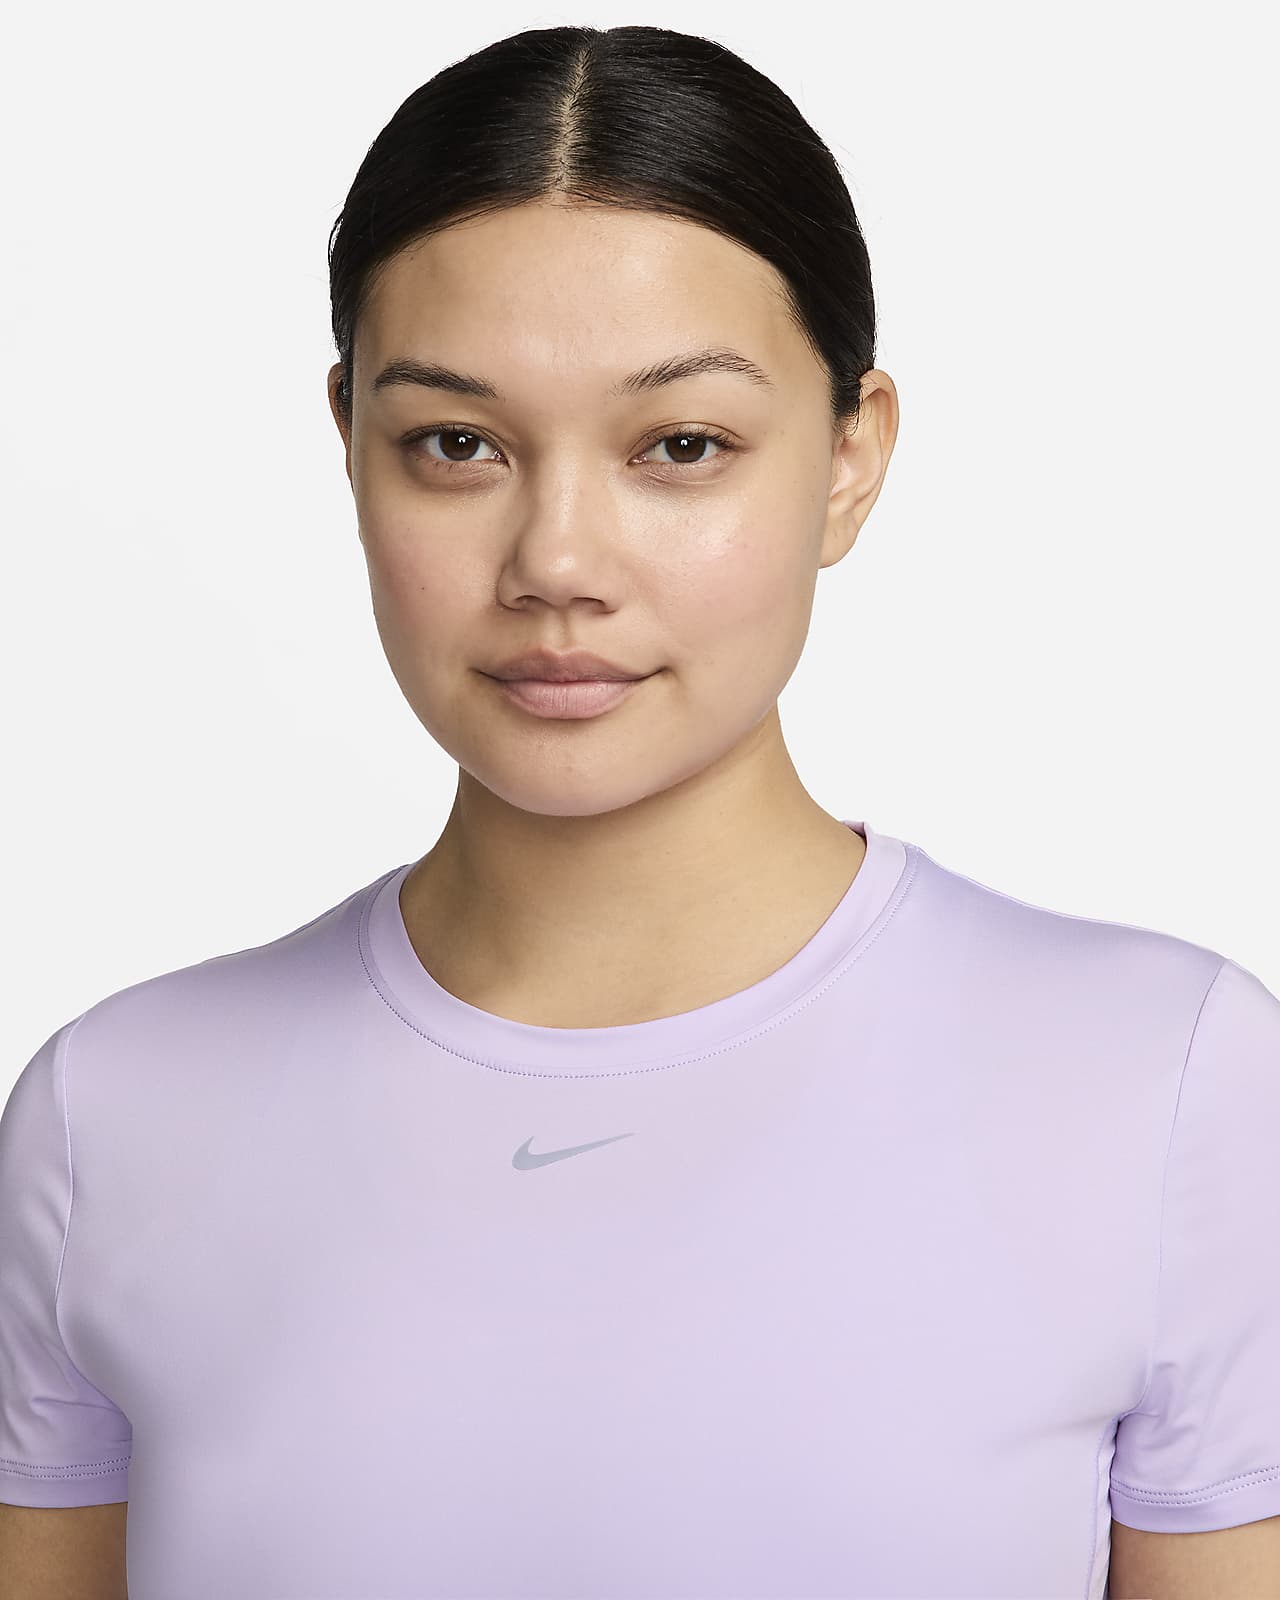 Shop Nike Workout Clothes For Women with great discounts and